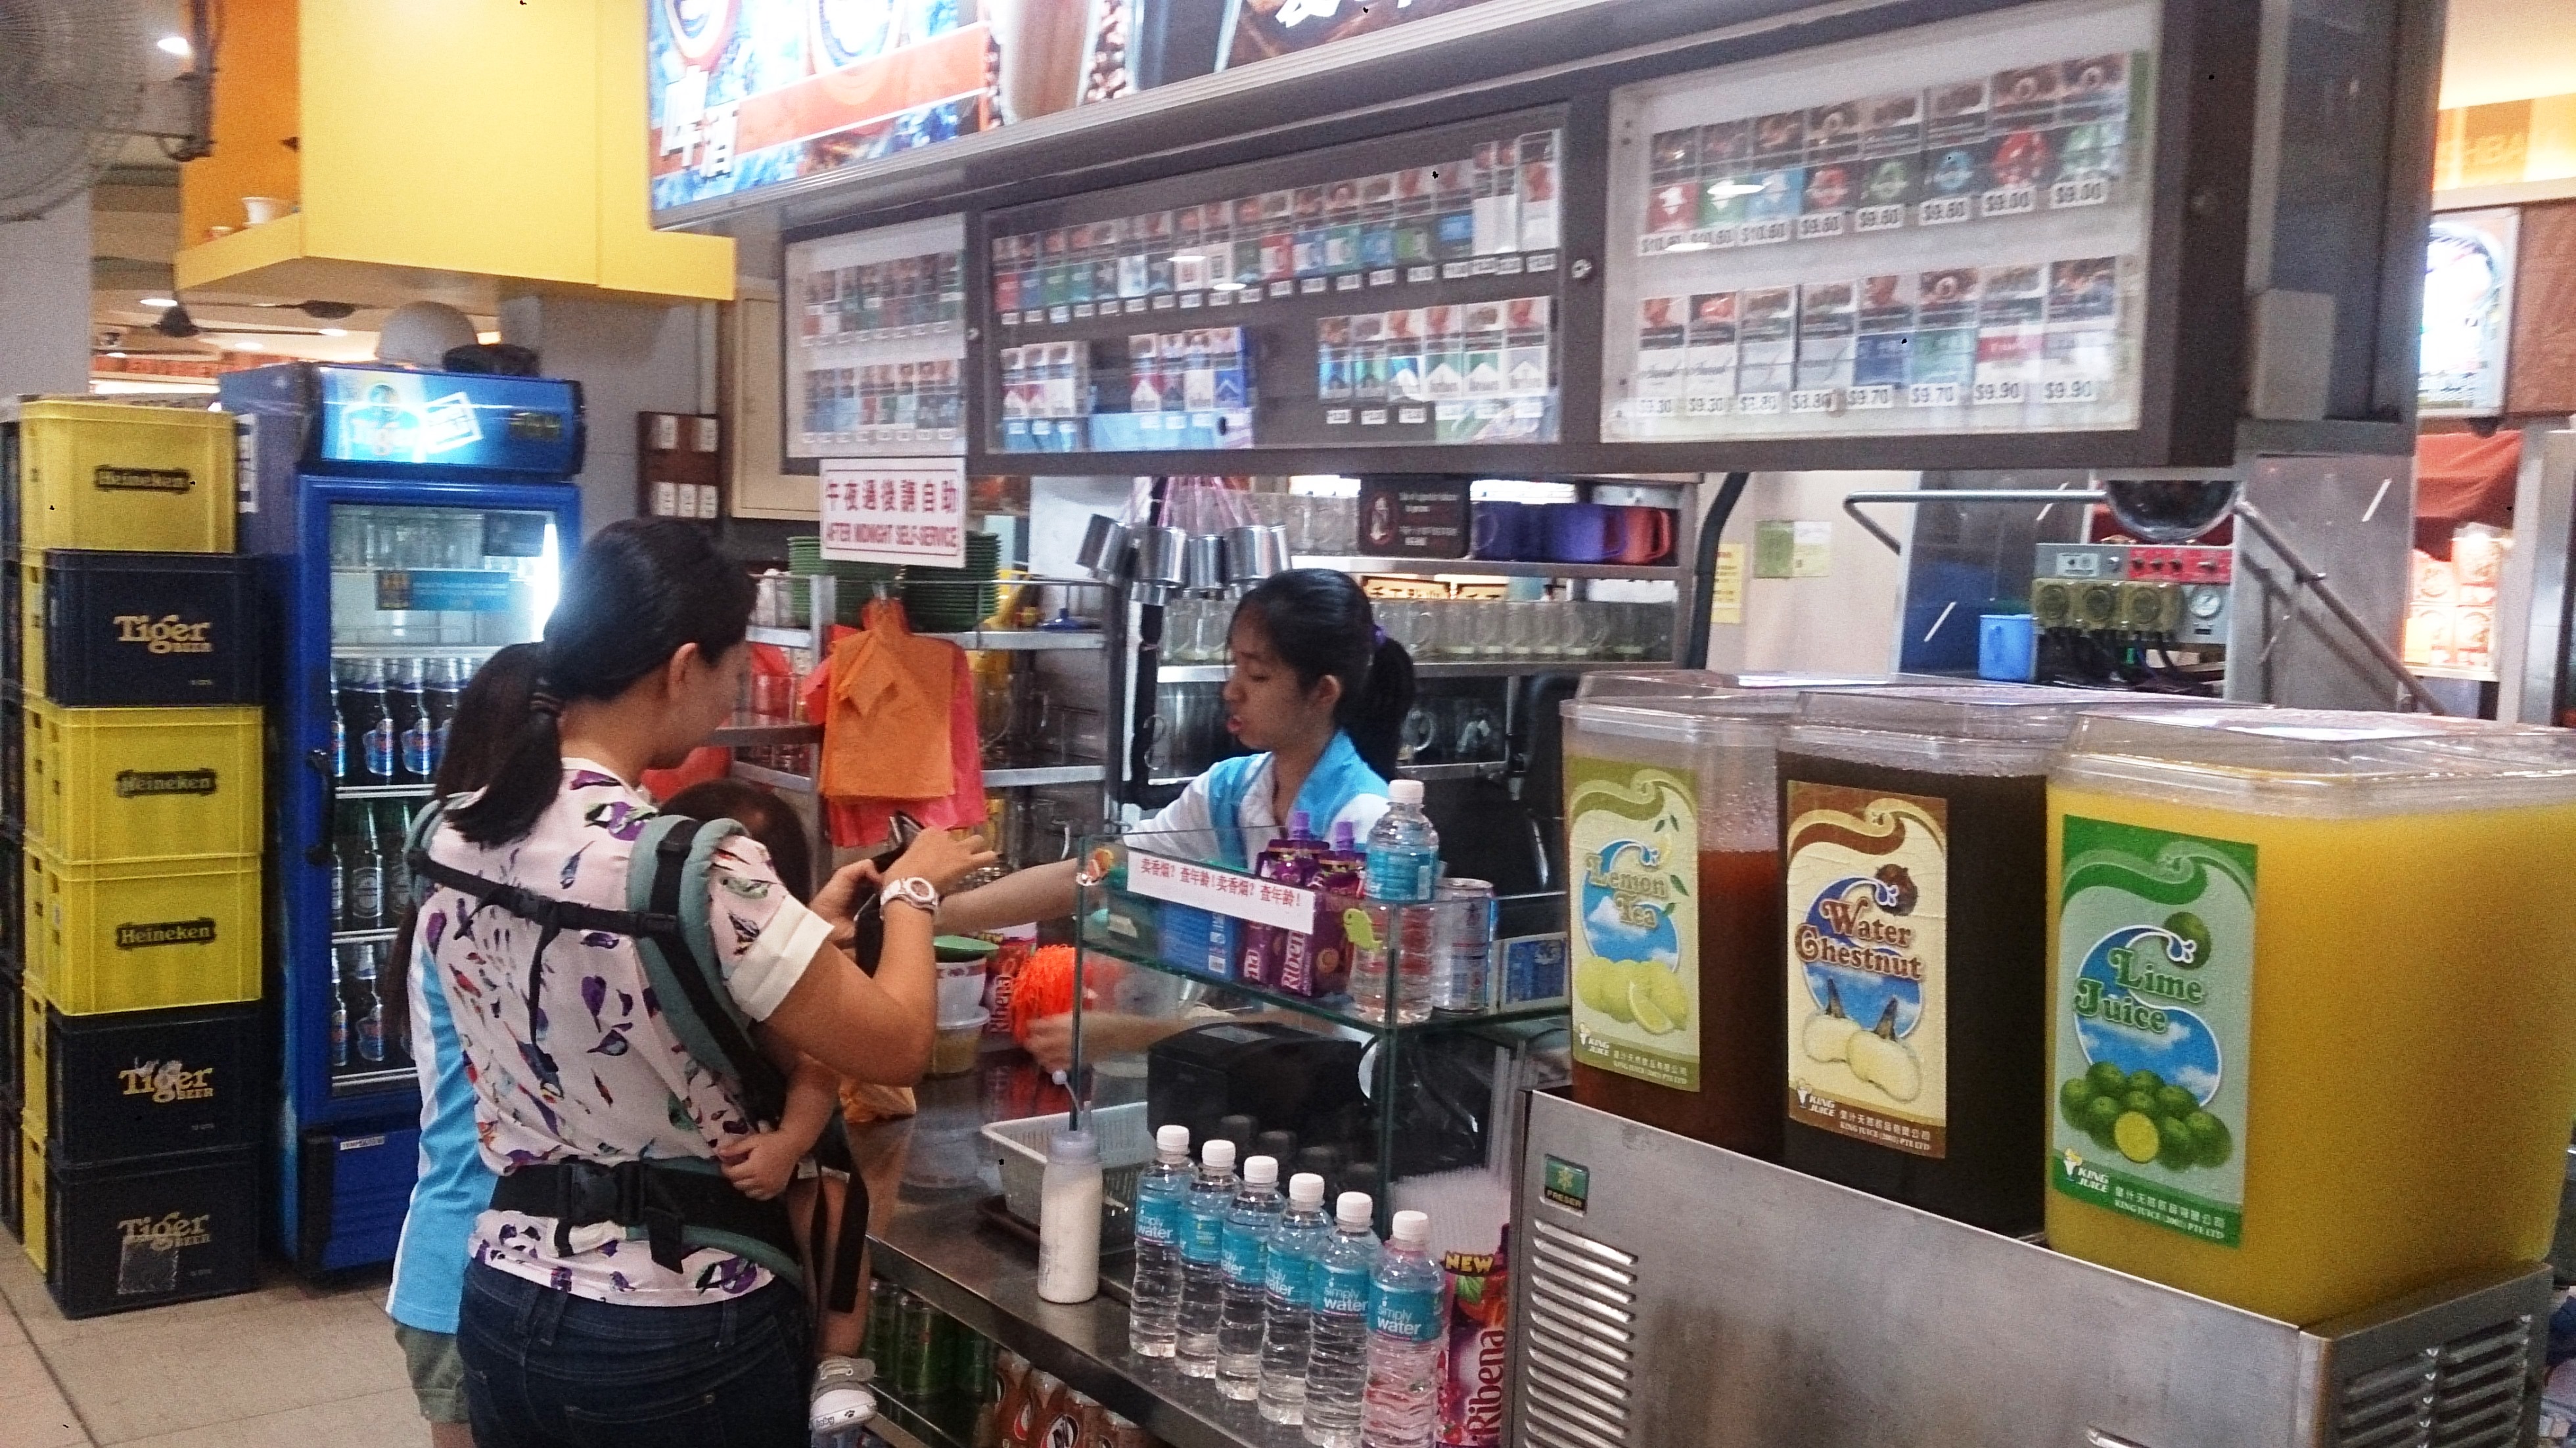 File:Drinks stall in a coffee shop in Singapore - 20131030.jpg ...